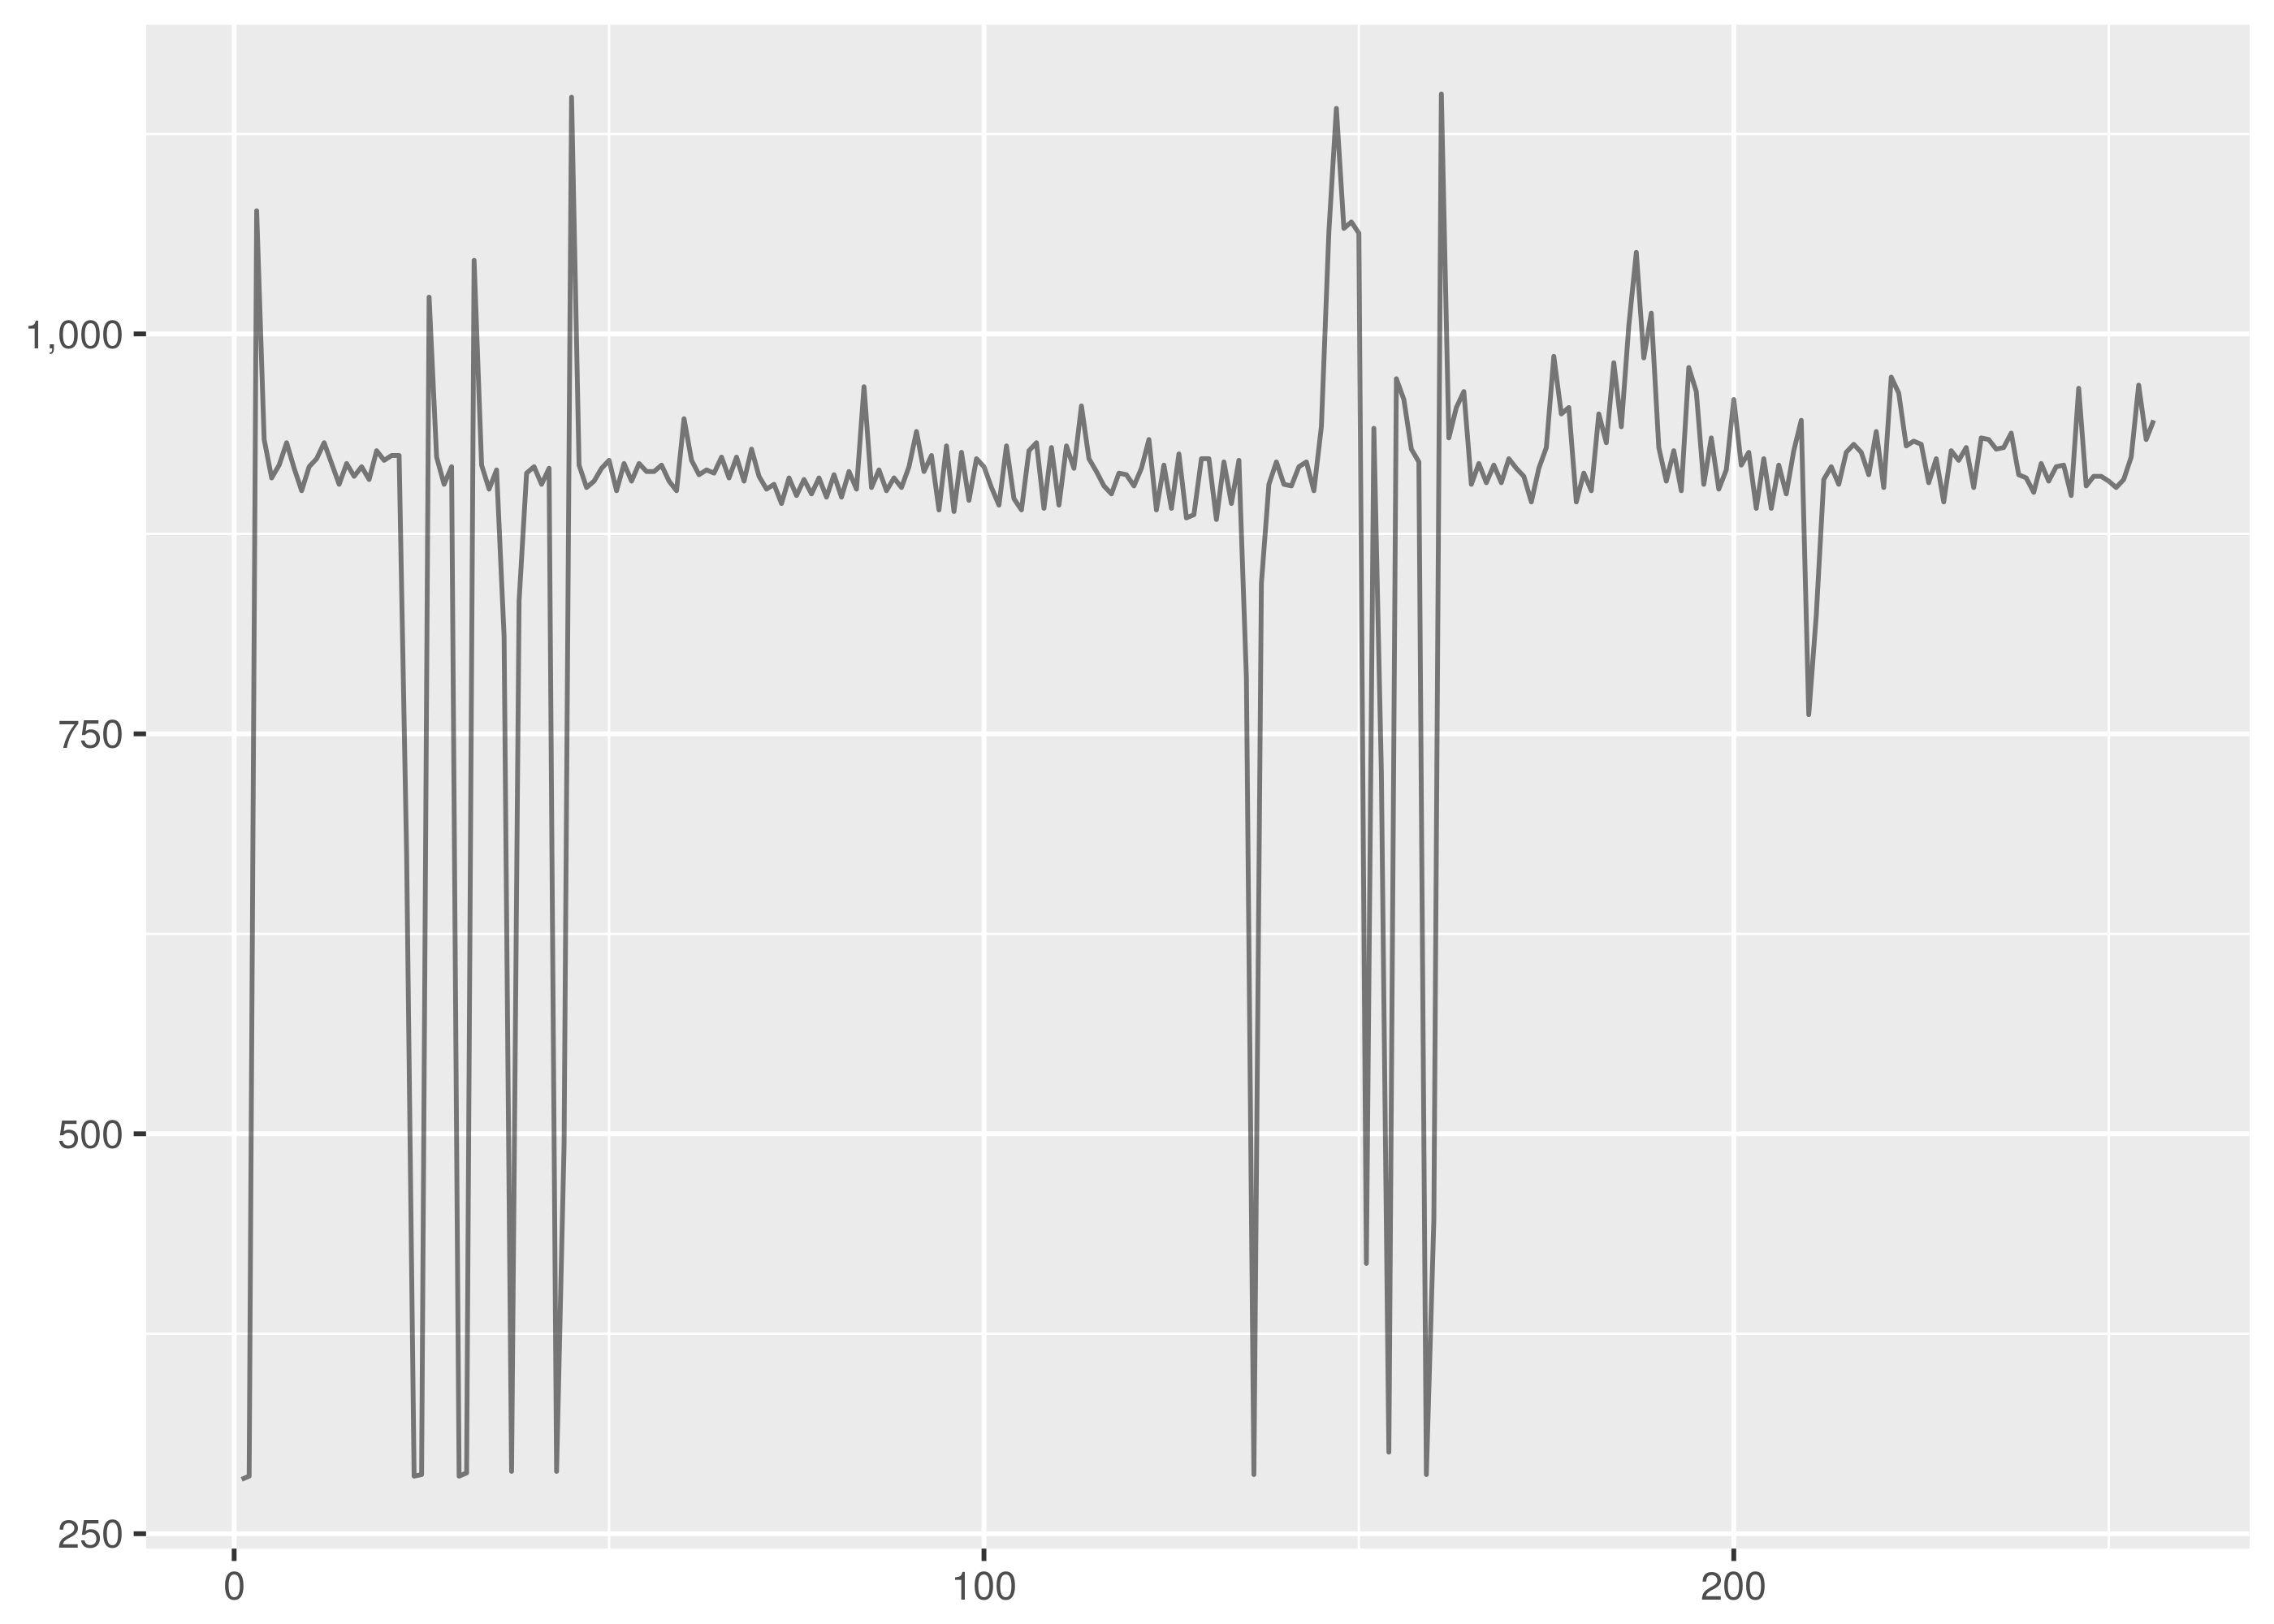 _images/http1-timeseries-1.png